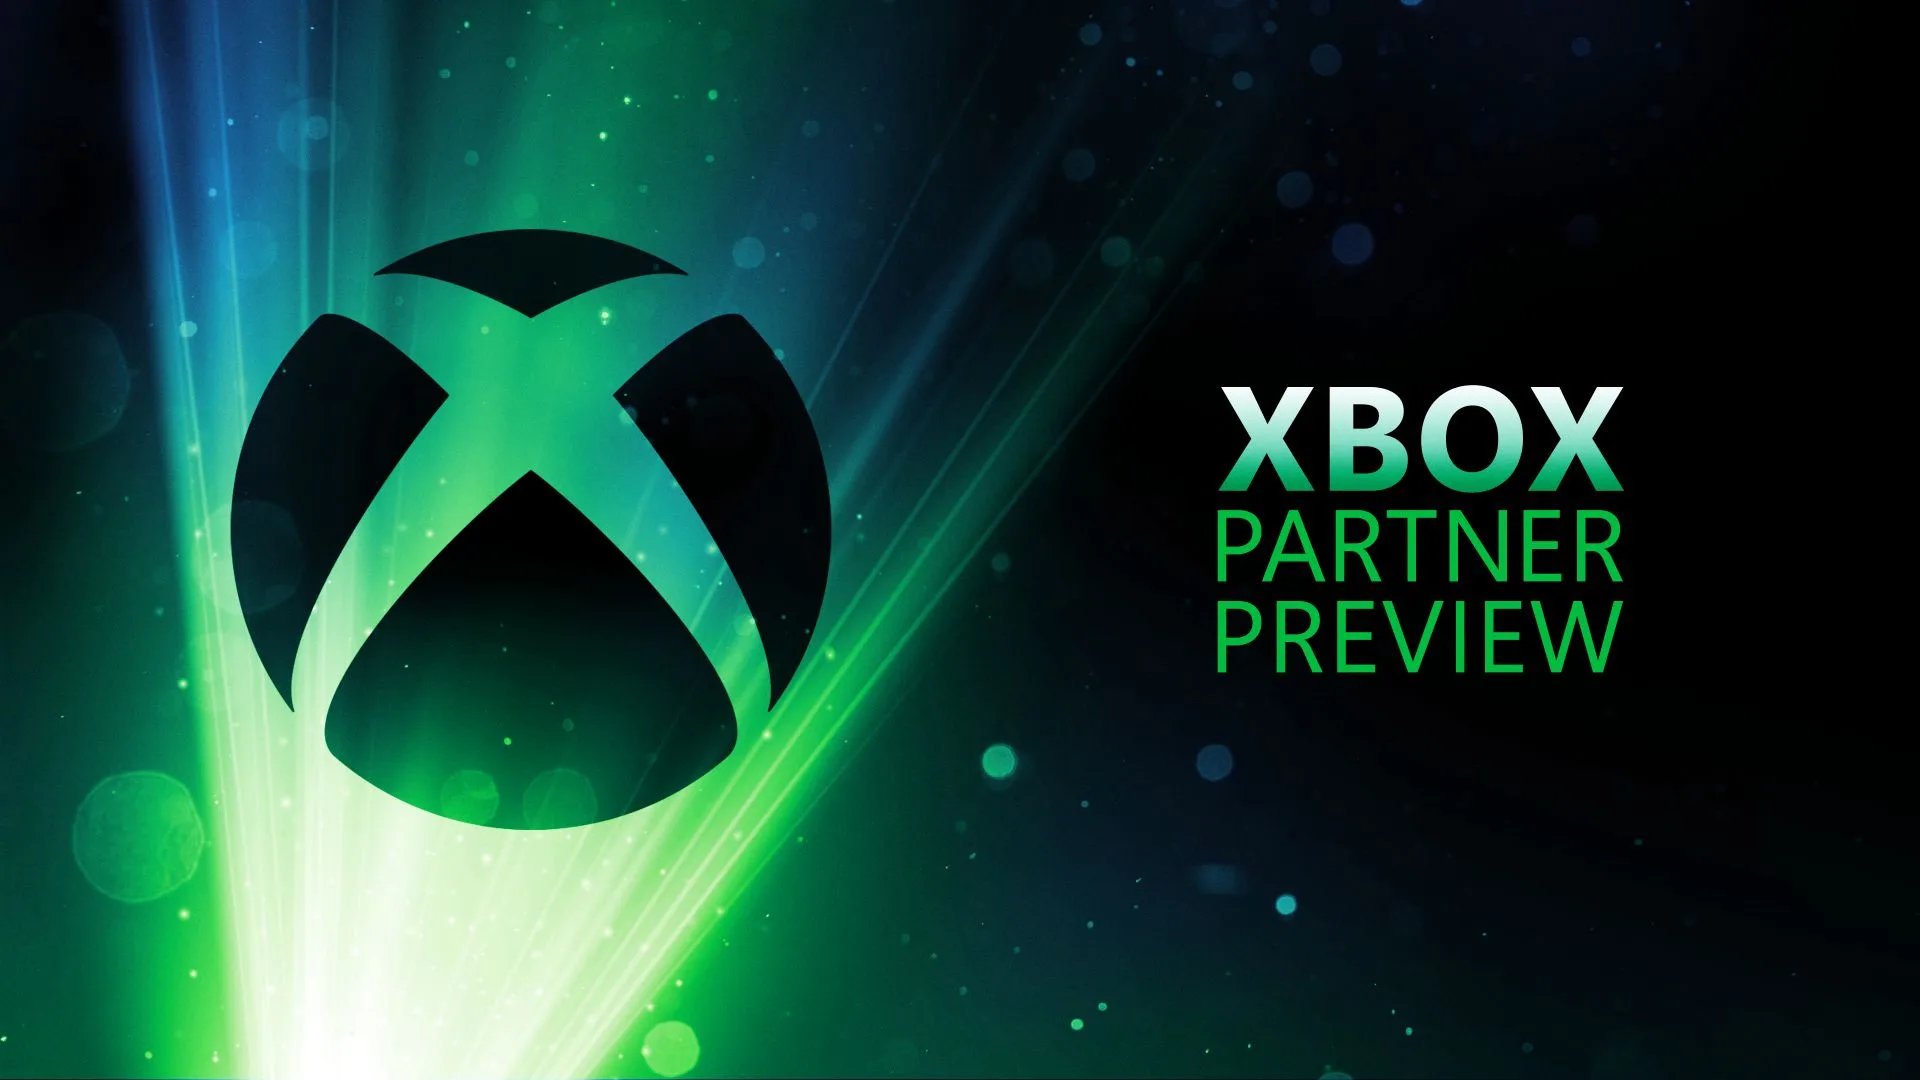 Xbox Partner Preview – All the trailers